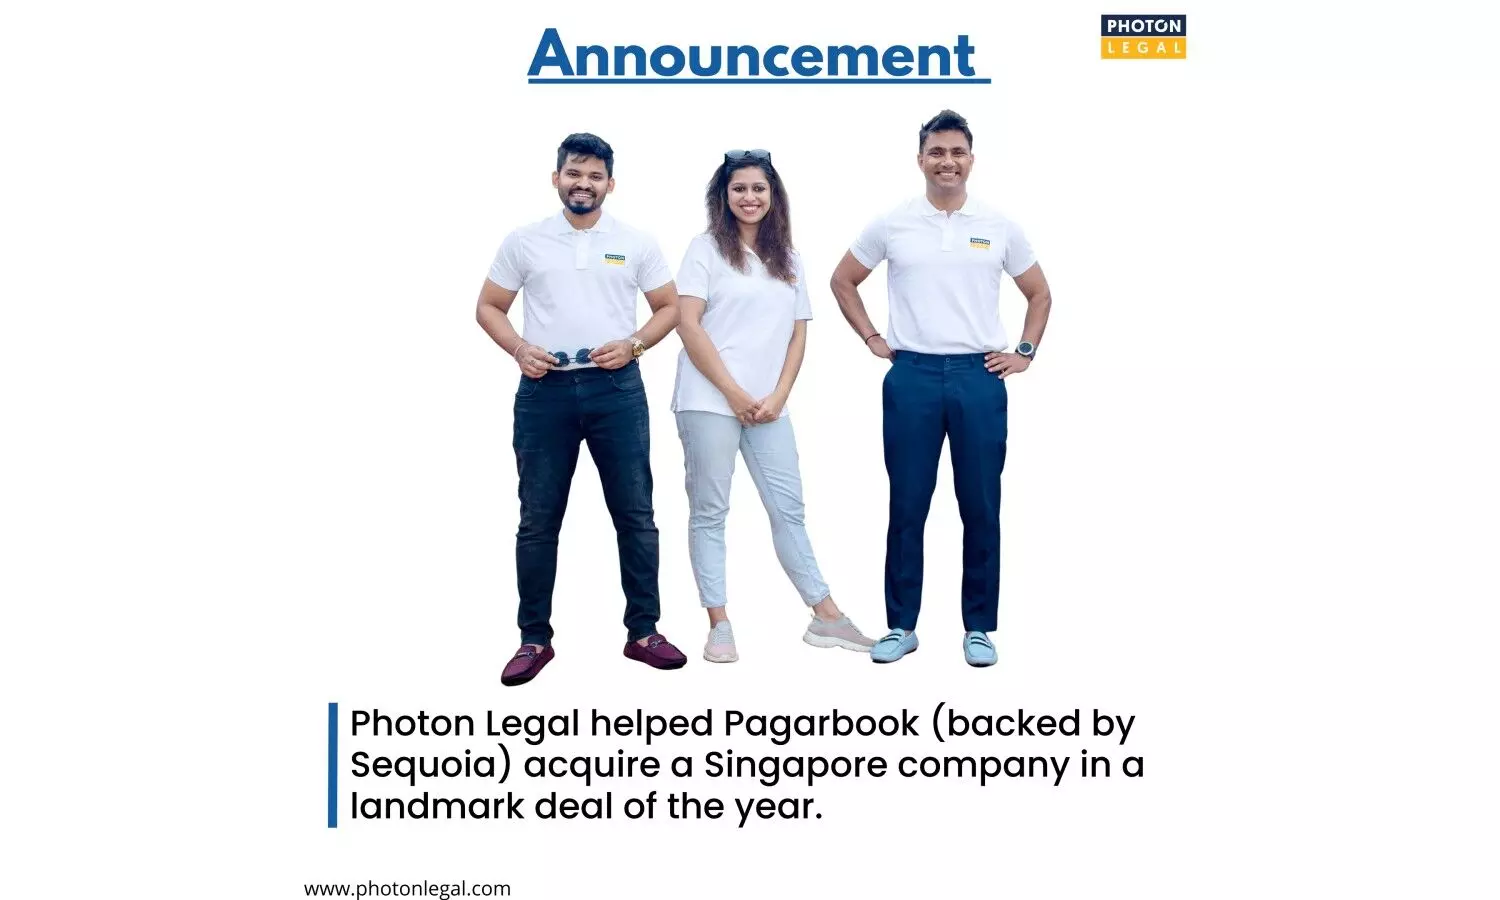 Photon Legal helps Bengaluru-based PagarBook make successful $5.6 million acquisition of Singapore-based Vara Technologies